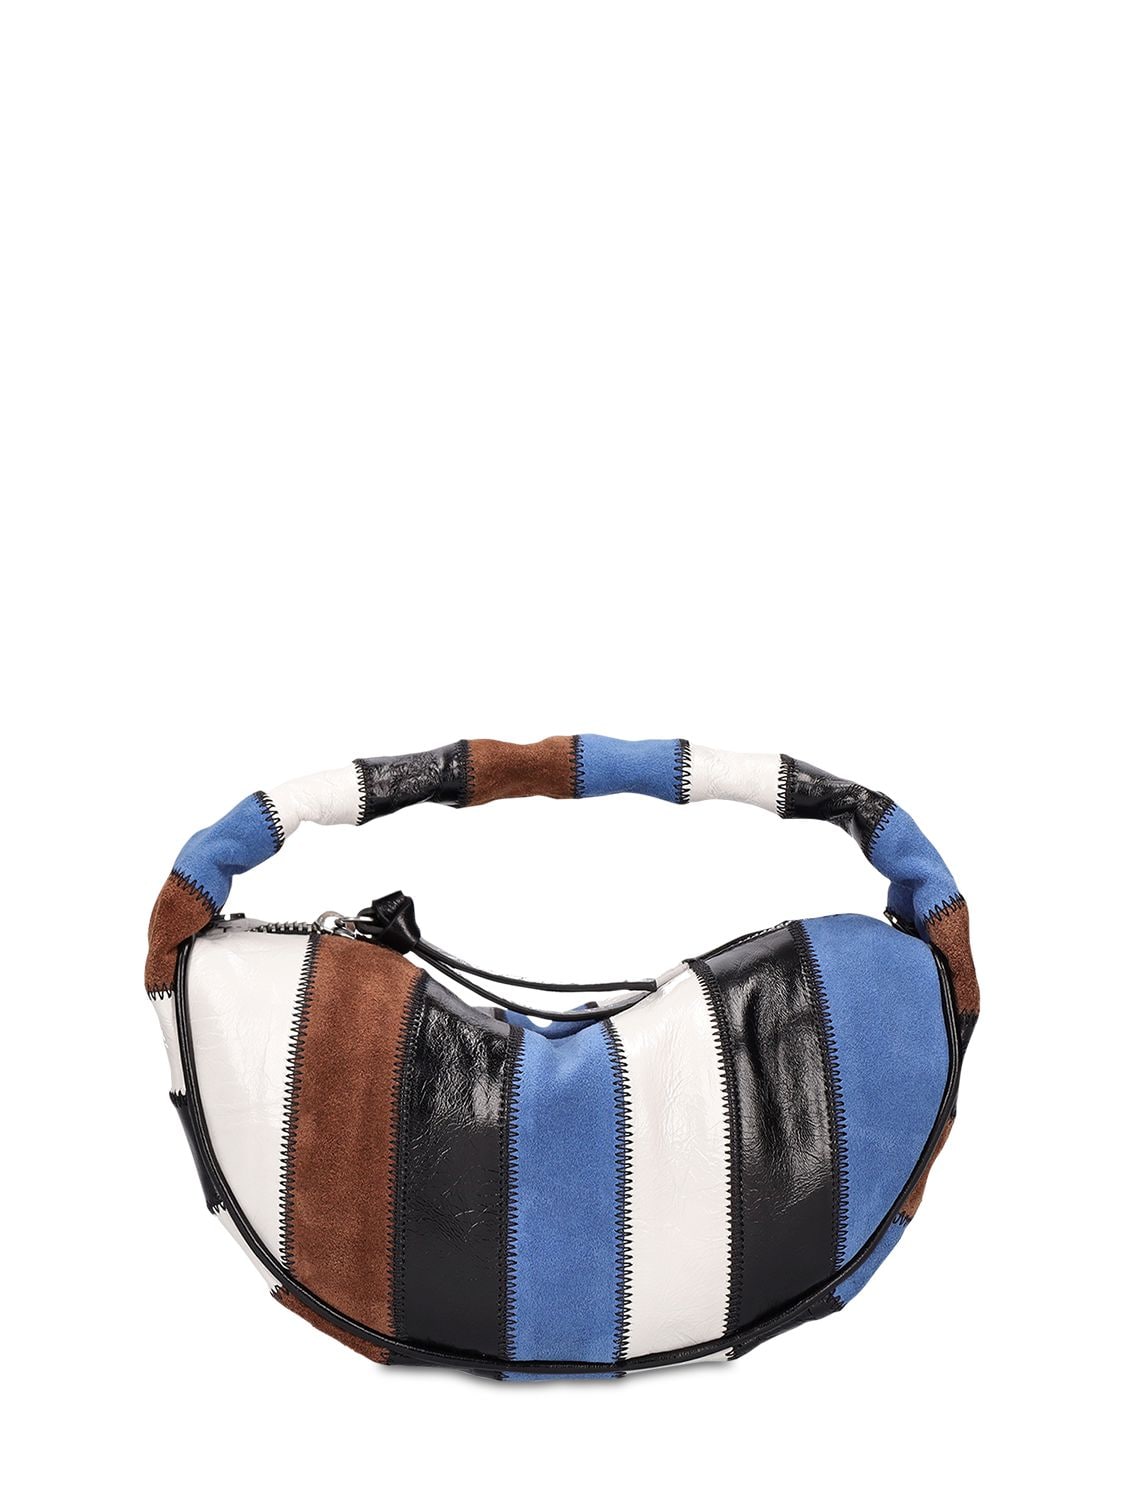 Baby Cush Patchwork Leather Bag